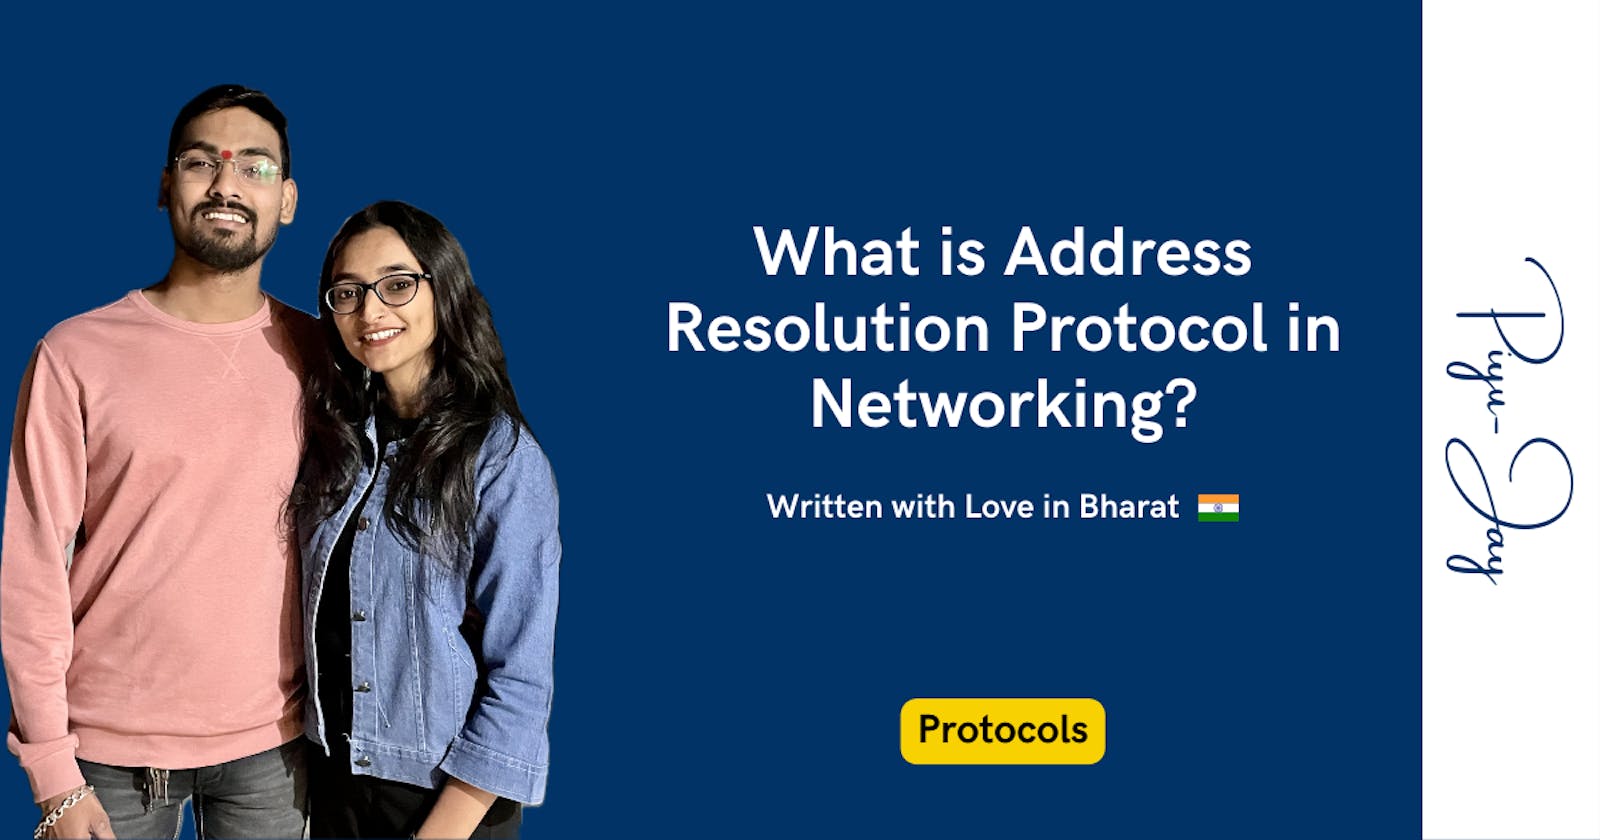 What is Address Resolution Protocol?